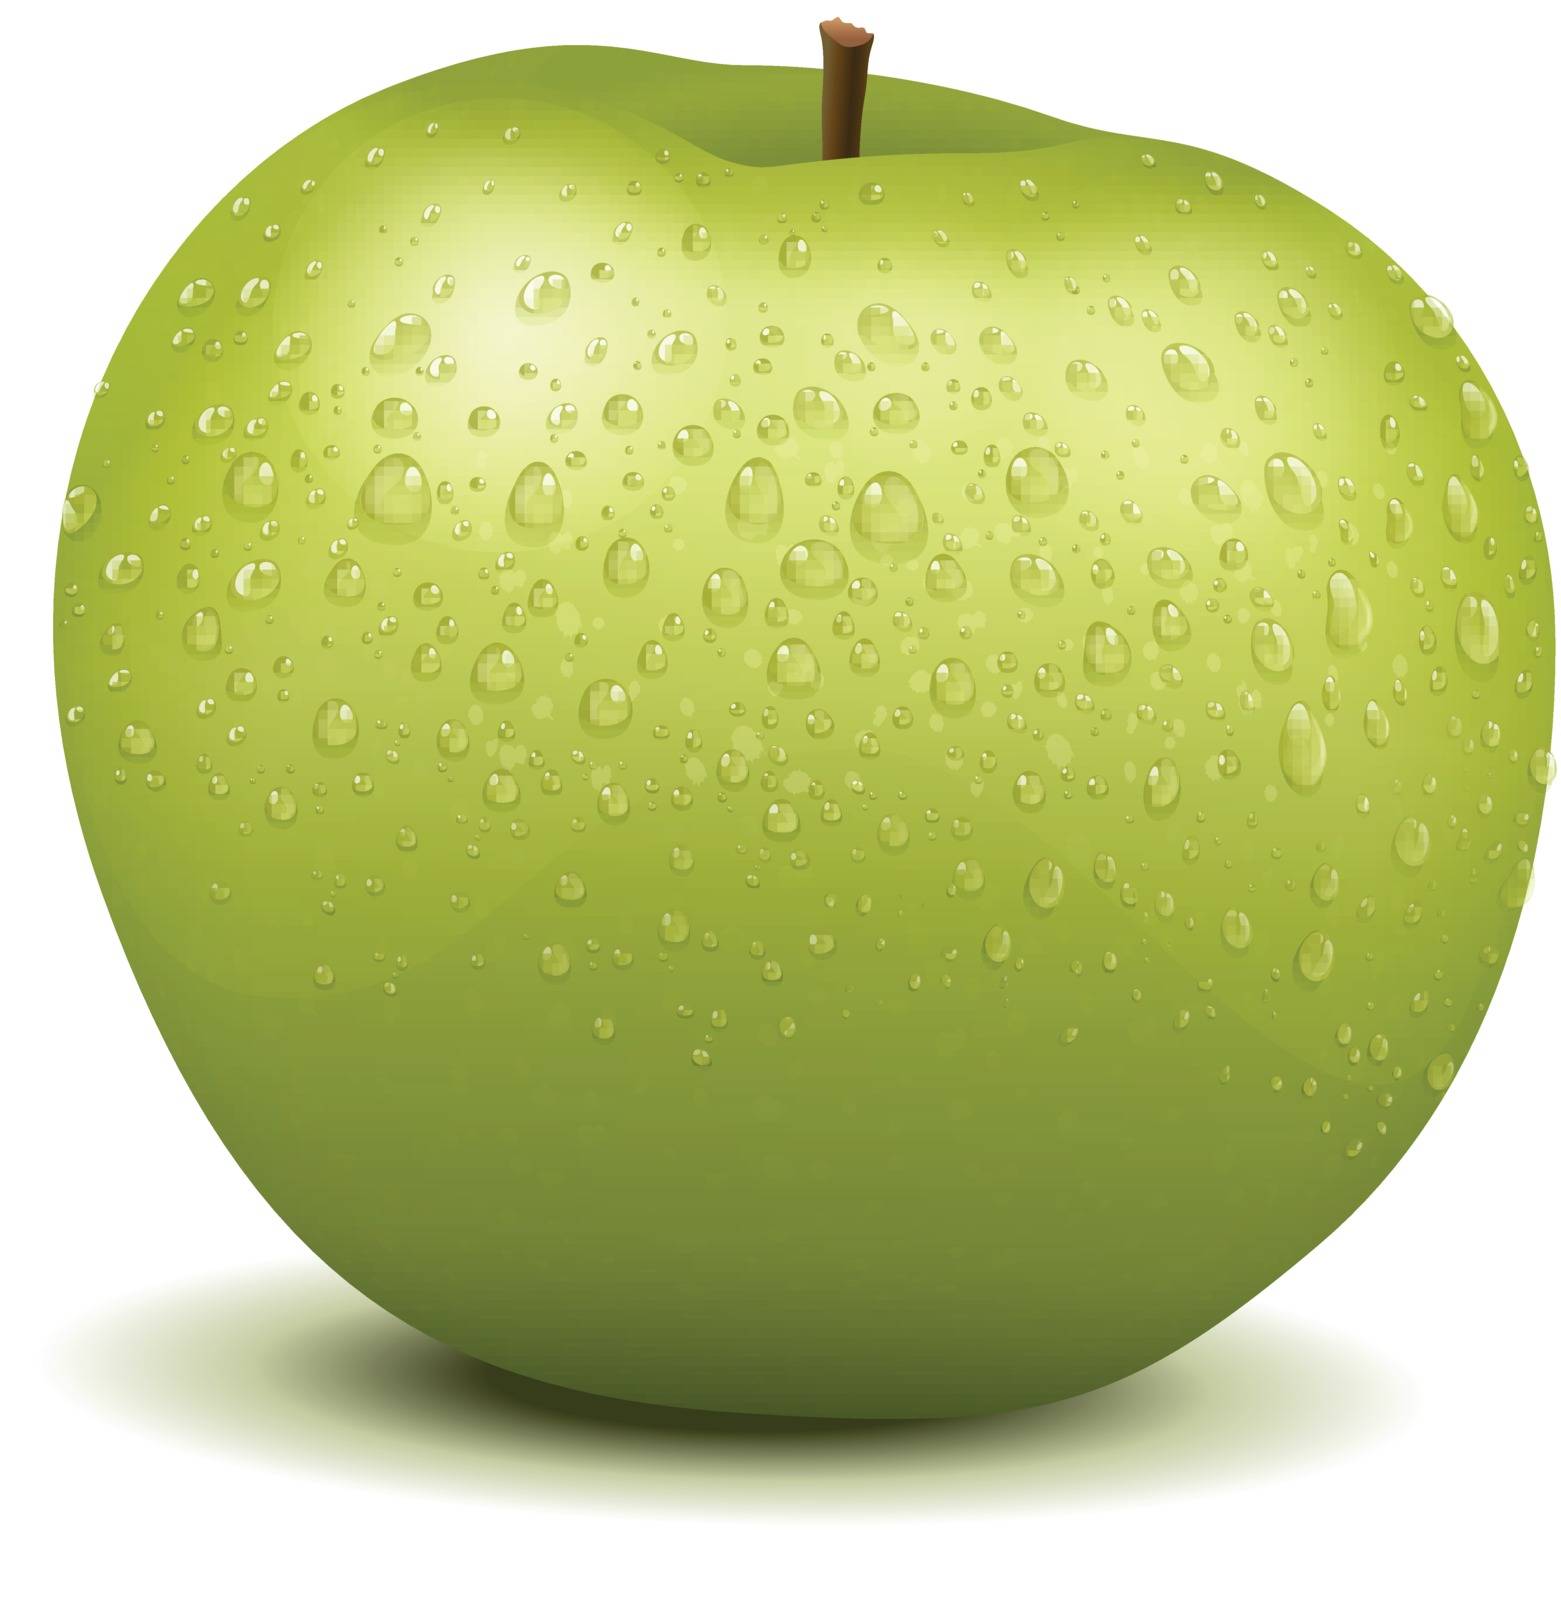 Illustration of a realistic apple